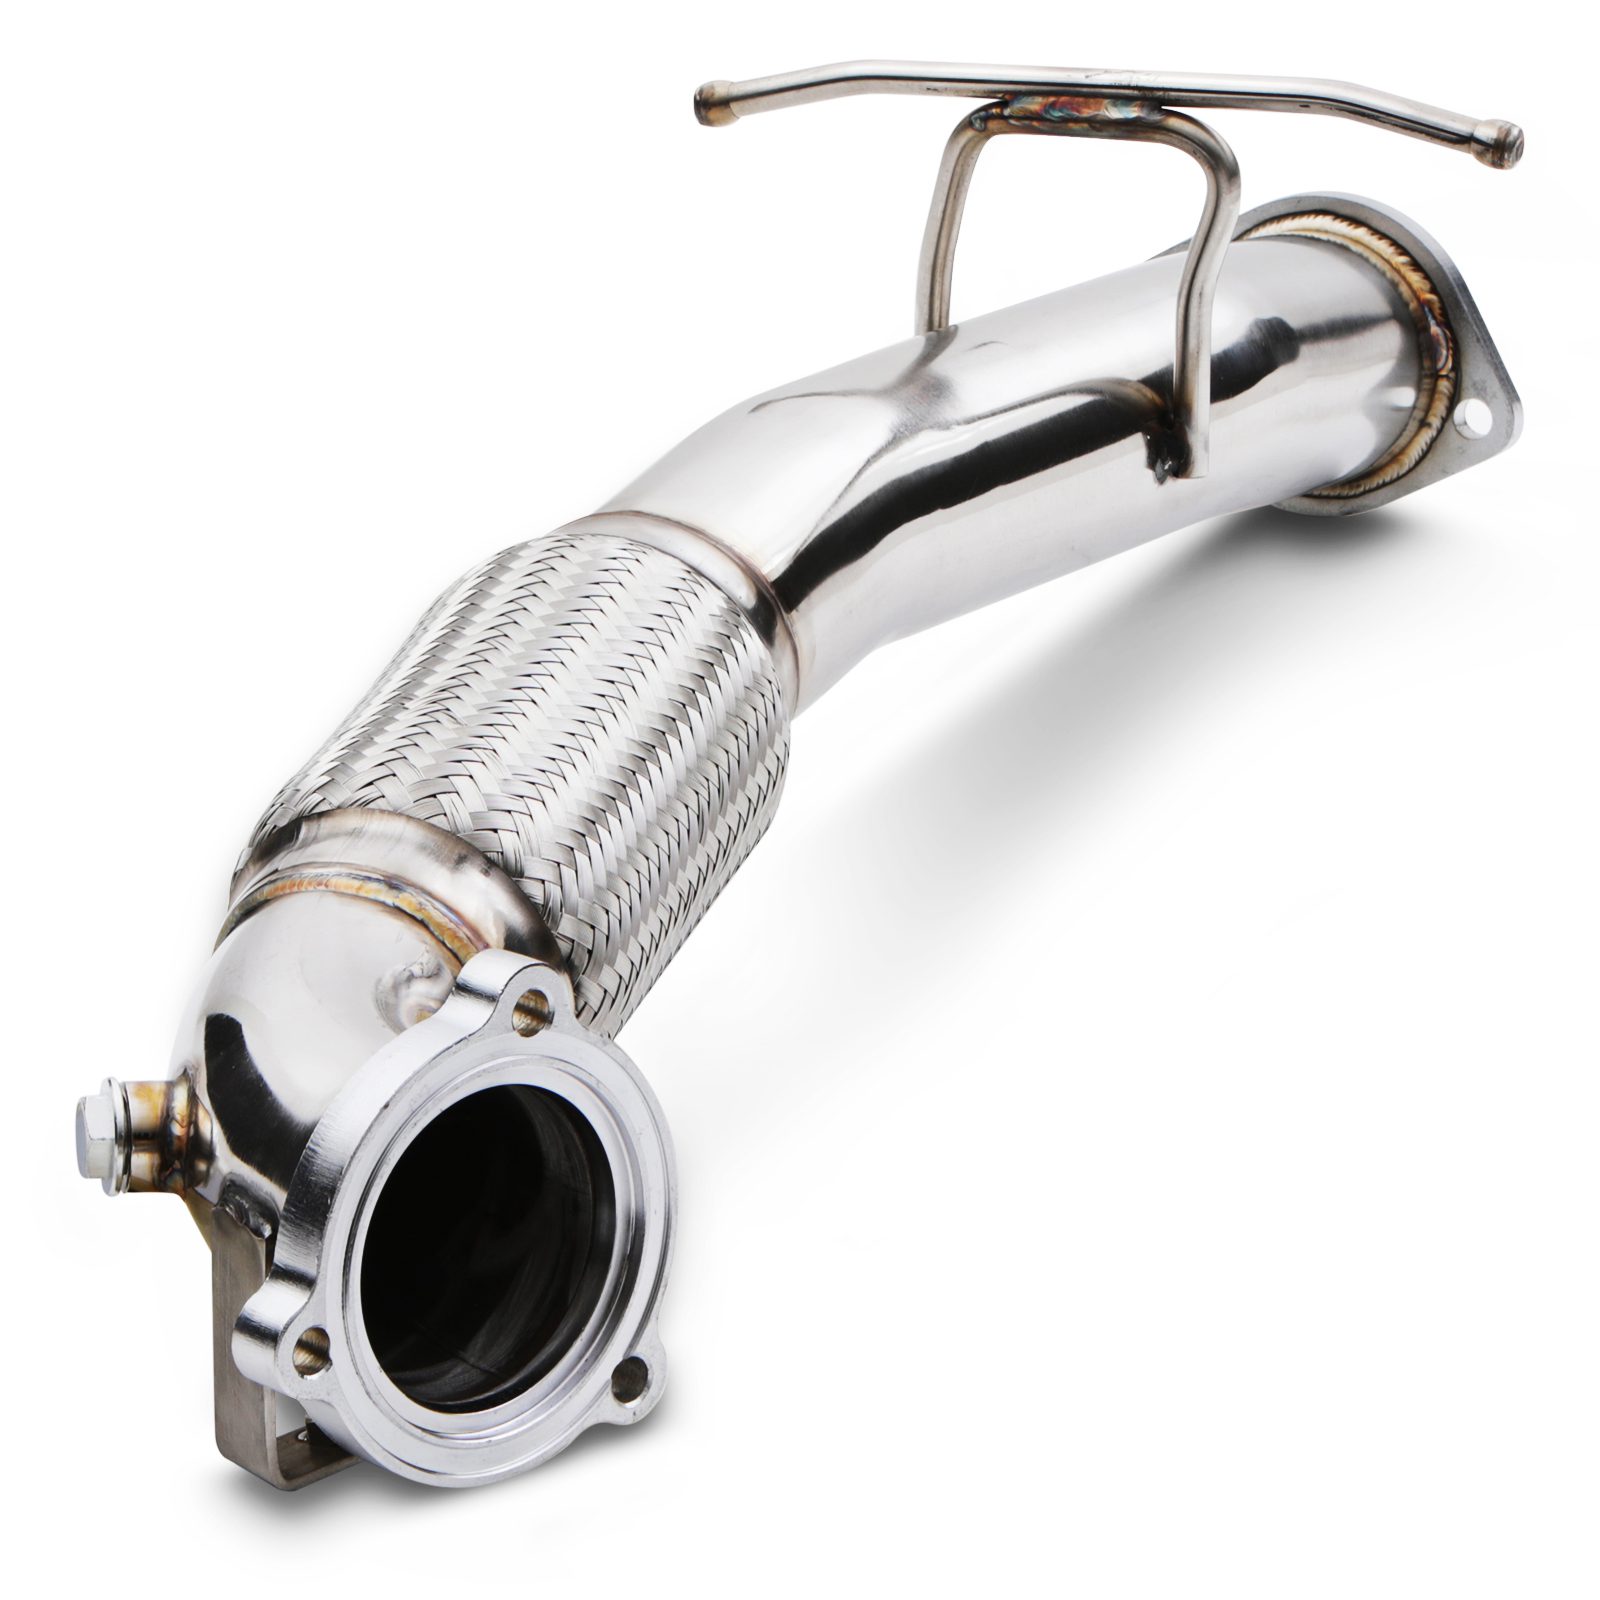 For Ford Focus ZETEC 4.5 inches Muffler Tip Stainless Steel Catback+Manifold Header+Downpipe Exhaust System 